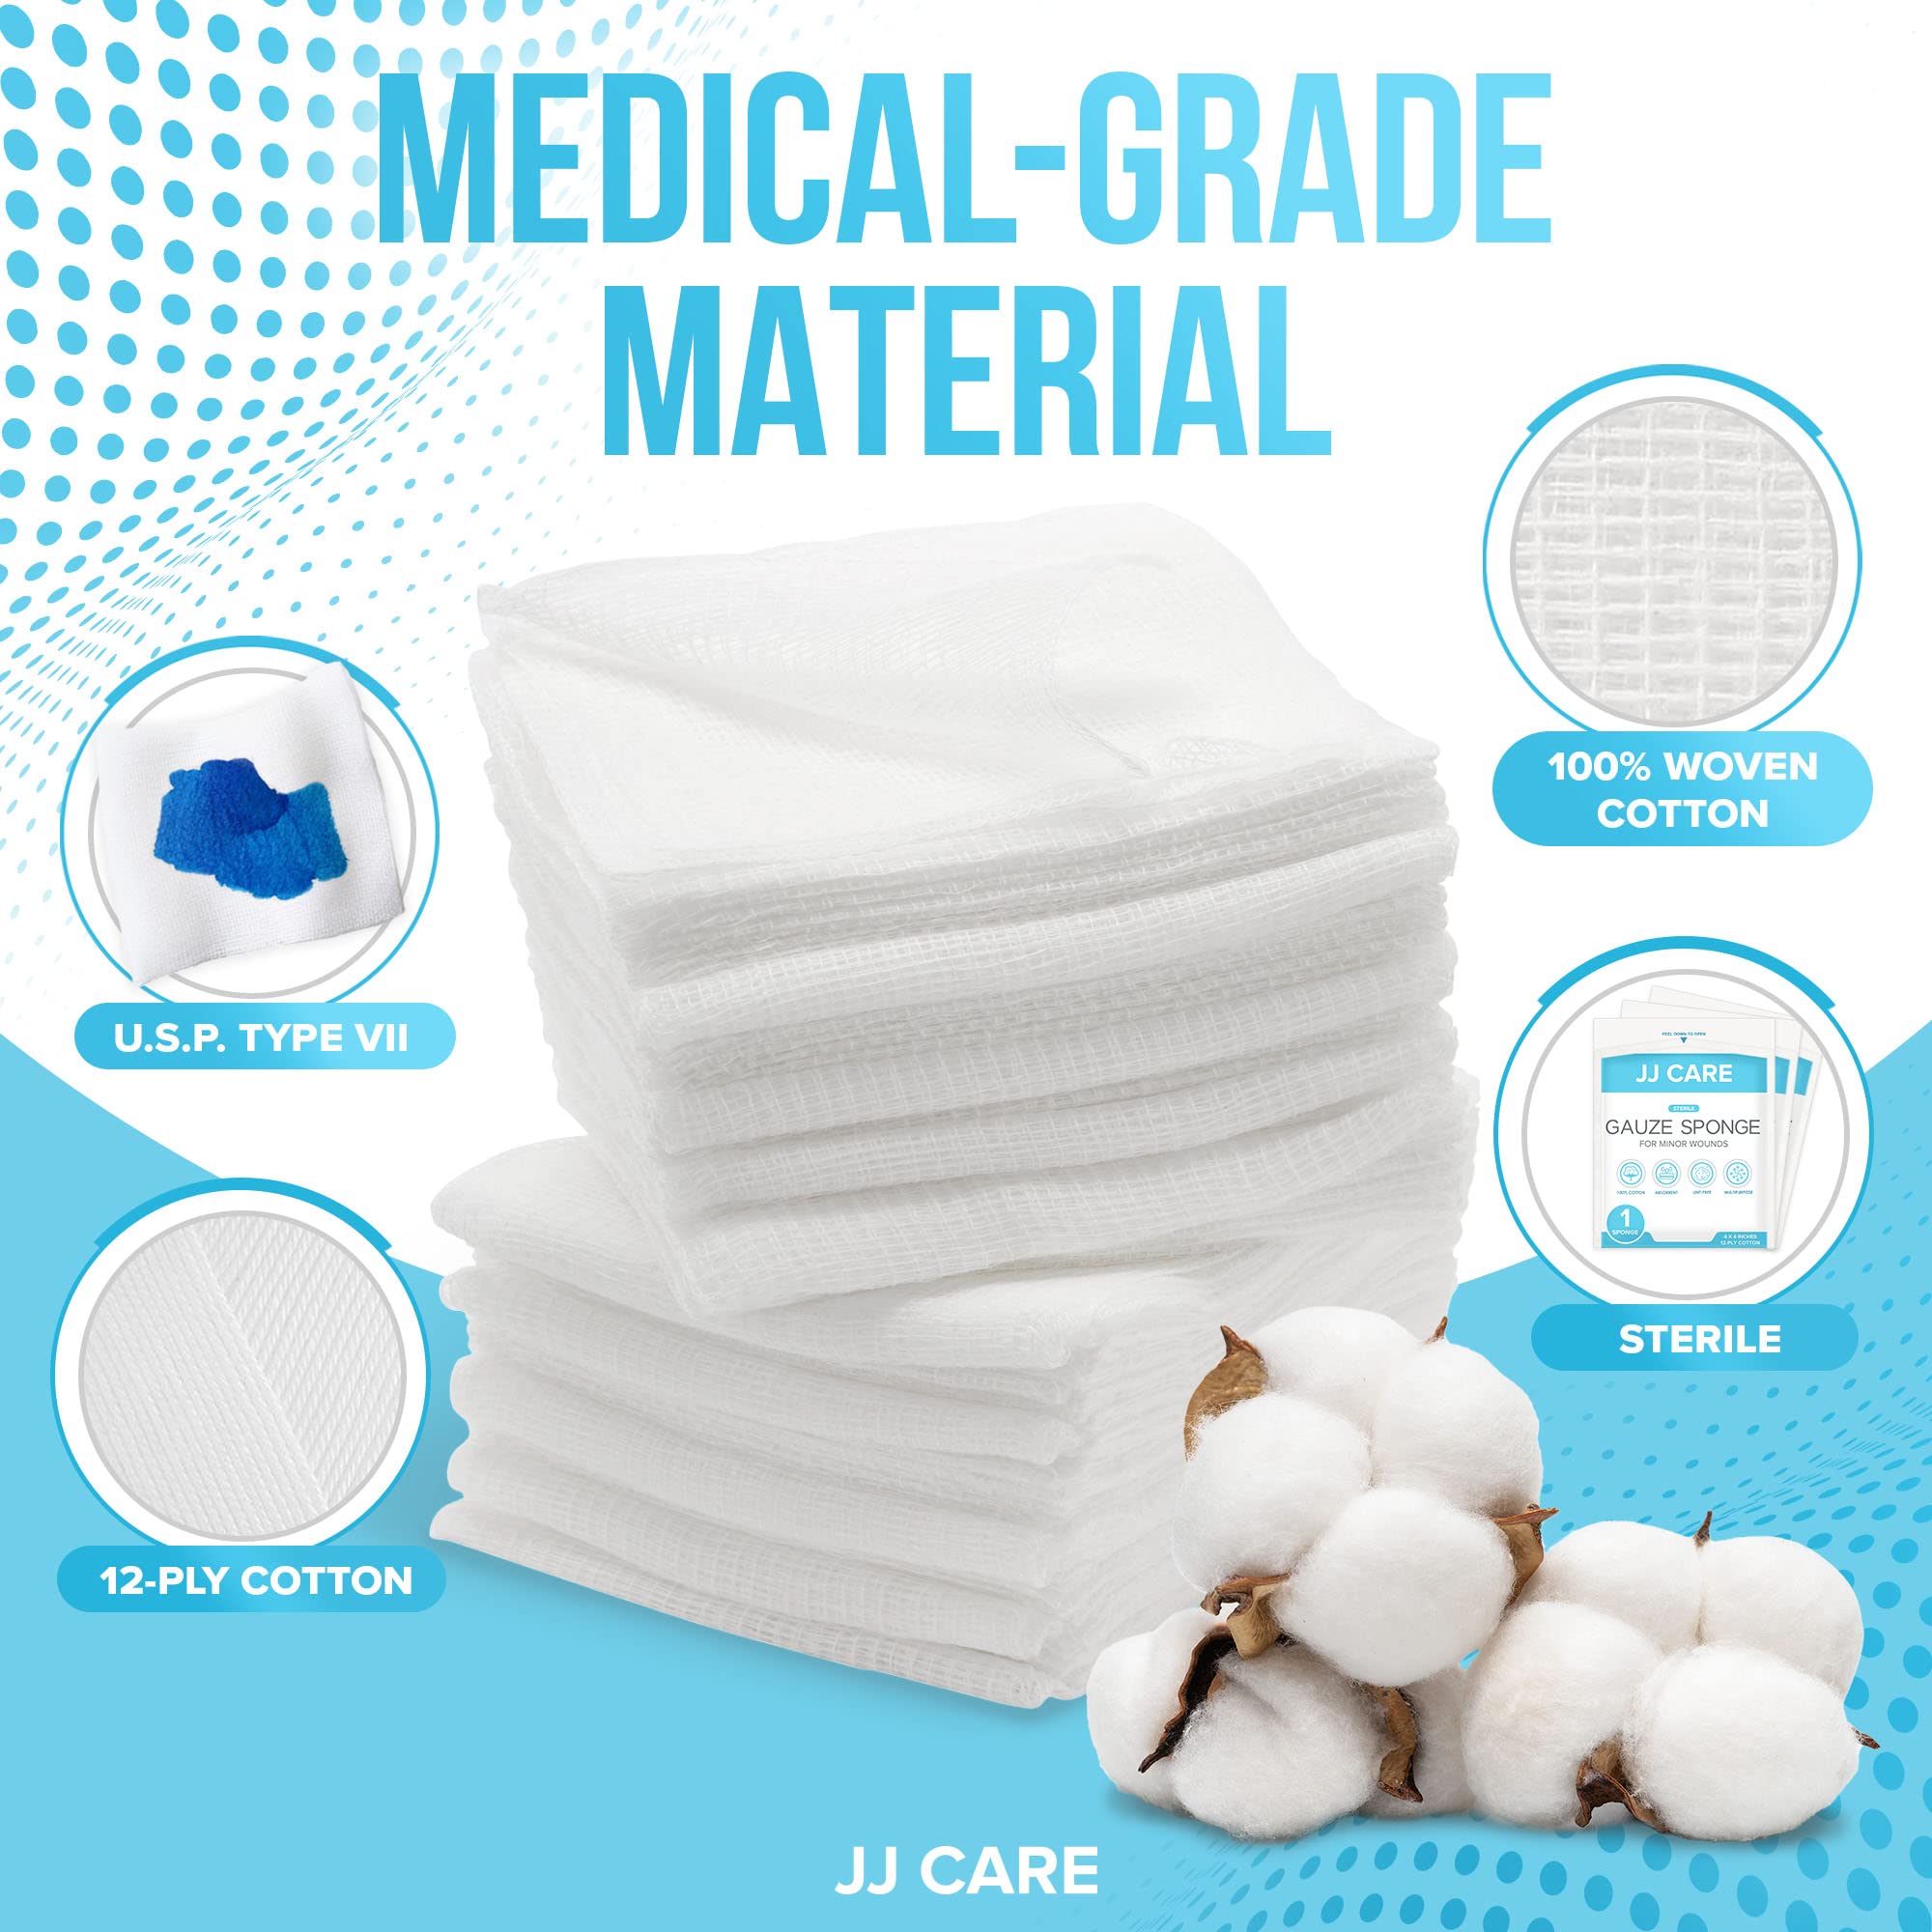 JJ CARE Sterile Gauze Pads 4" x 4" (Pack of 100), 12-Ply Cotton Gauze Pads, Individually-Wrapped Sterile Gauze Sponges, 100% Woven, Non-Stick Medical Gauze Pads for First Aid Kit & Wound Care